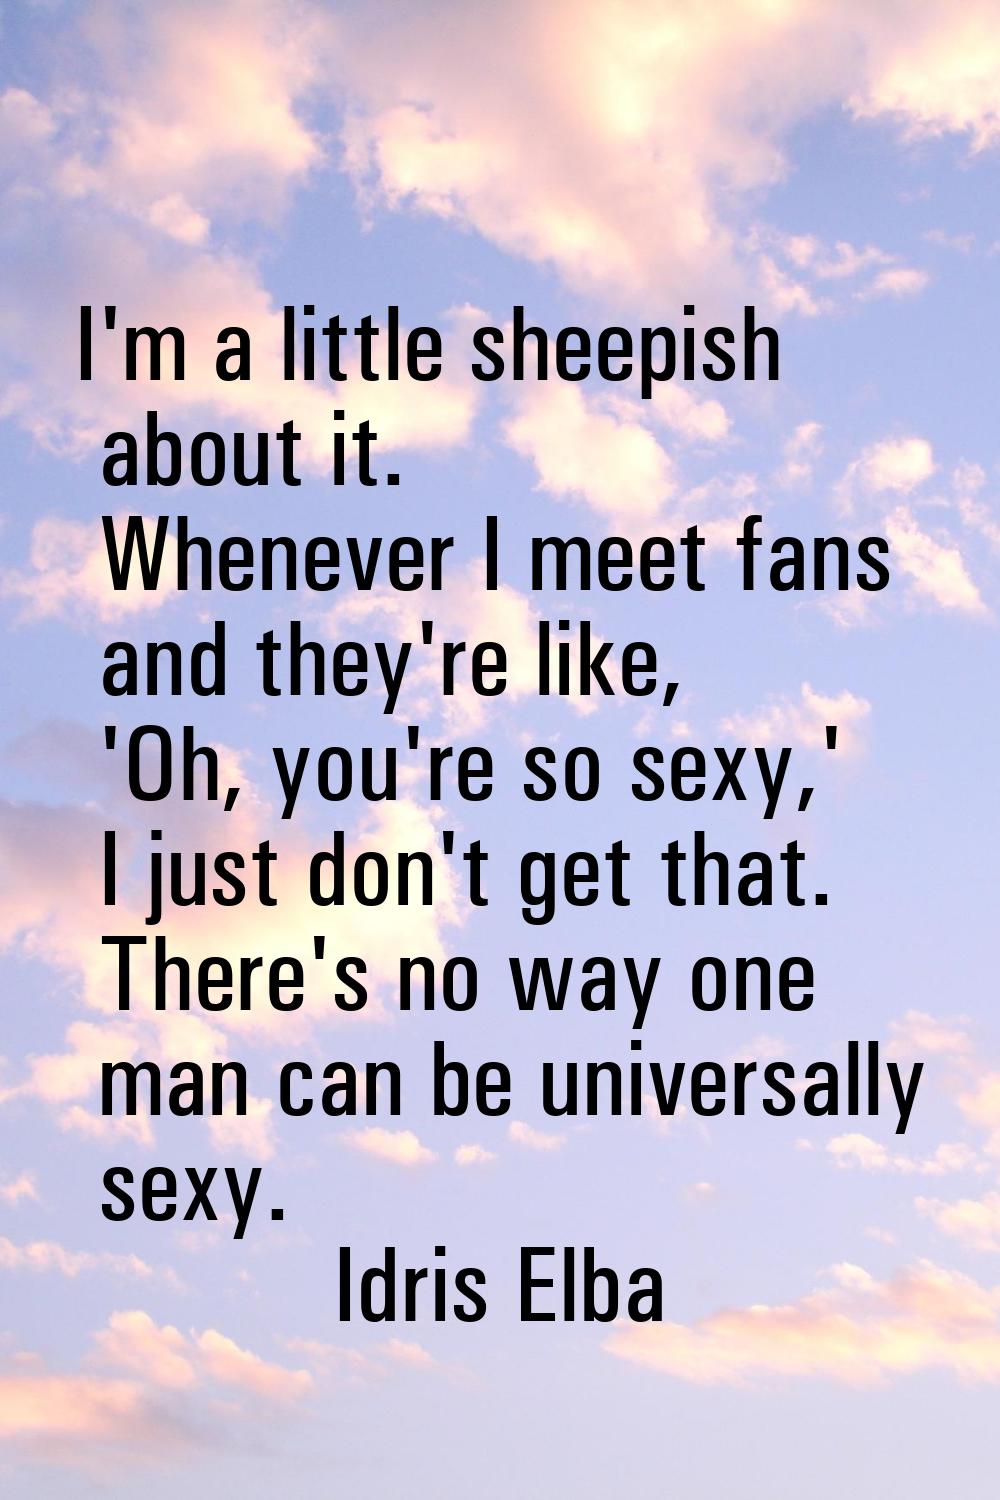 I'm a little sheepish about it. Whenever I meet fans and they're like, 'Oh, you're so sexy,' I just